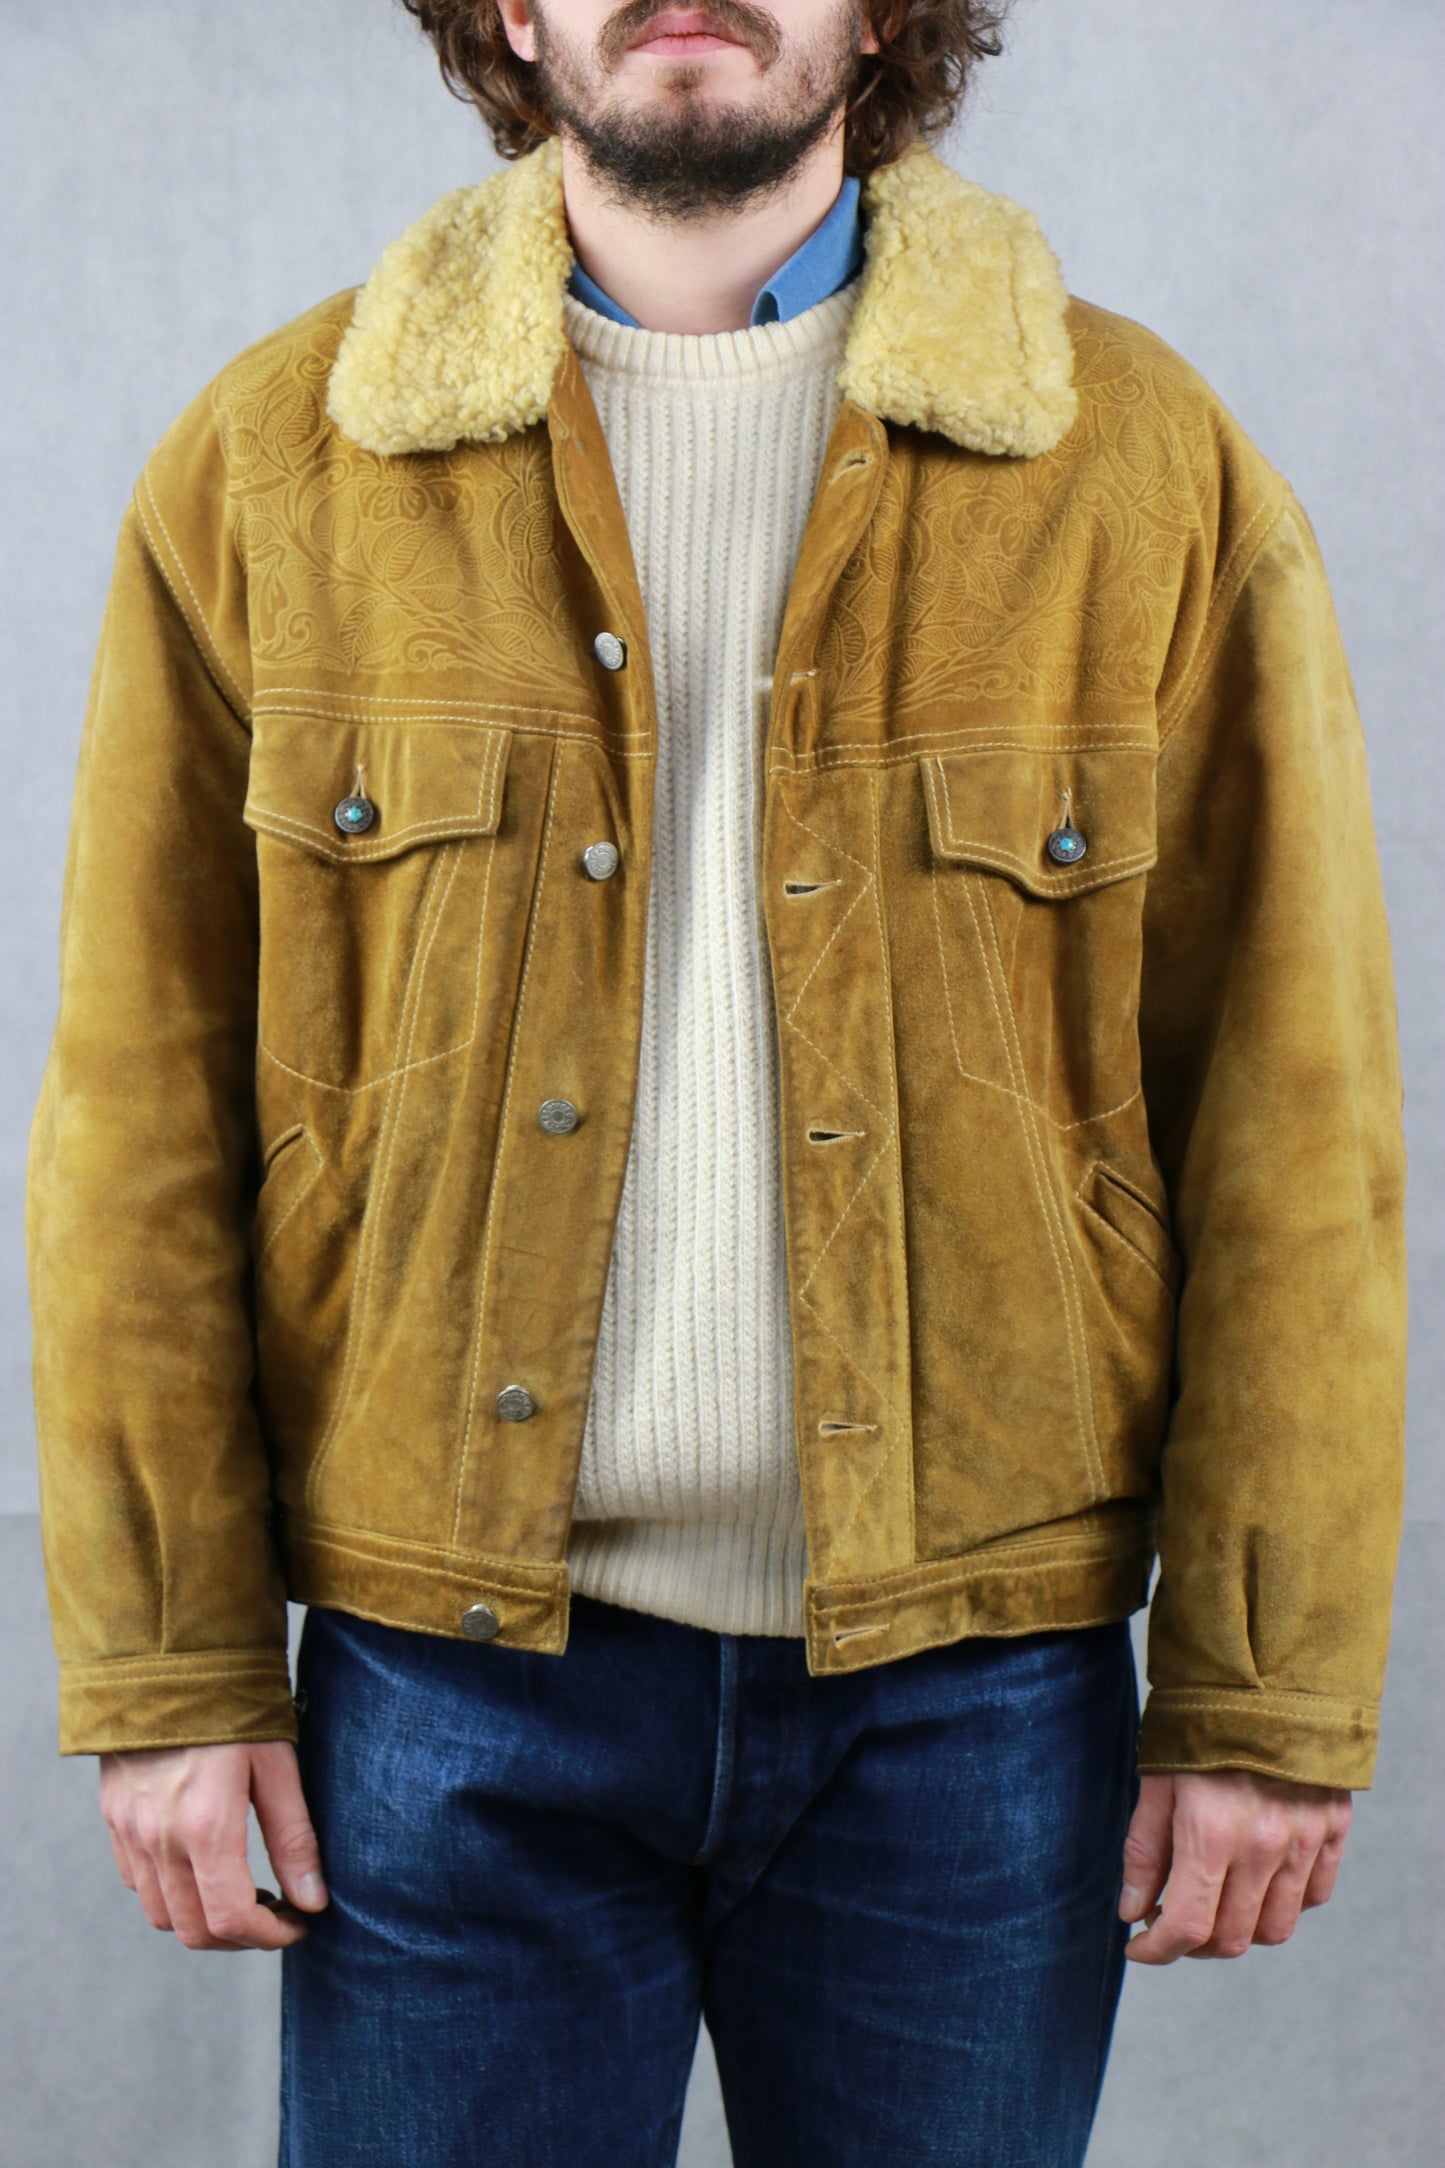 Turquoise Tribes Shearling Lining Jacket, clochard92.com